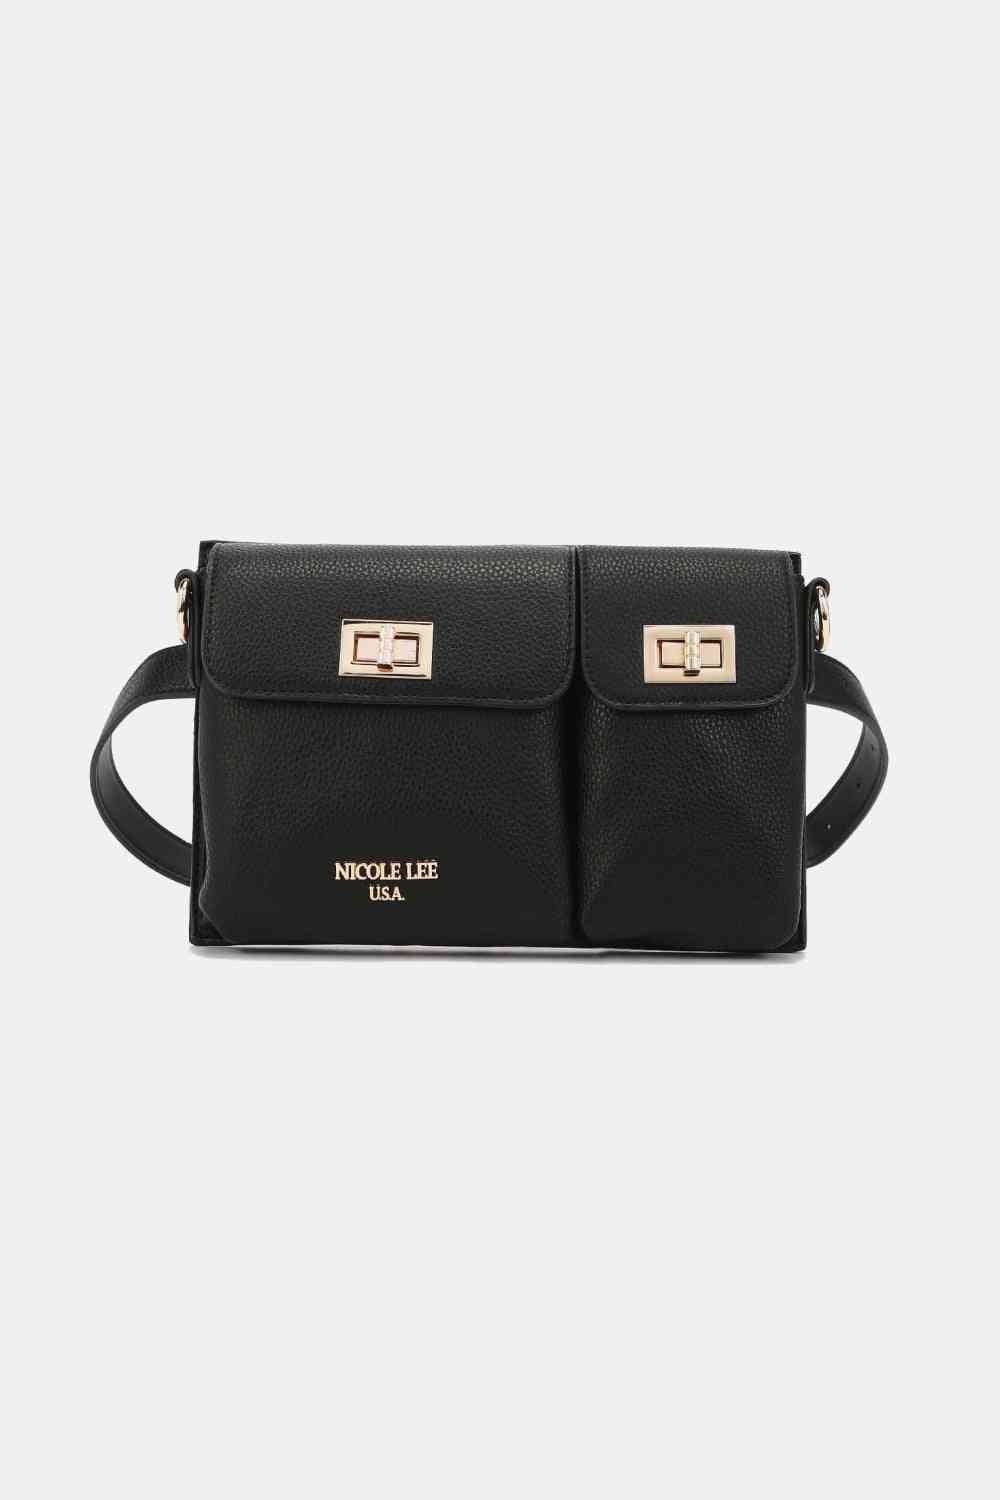 Nicole Lee USA Multi-Pocket Fanny Pack - GemThreads Boutique